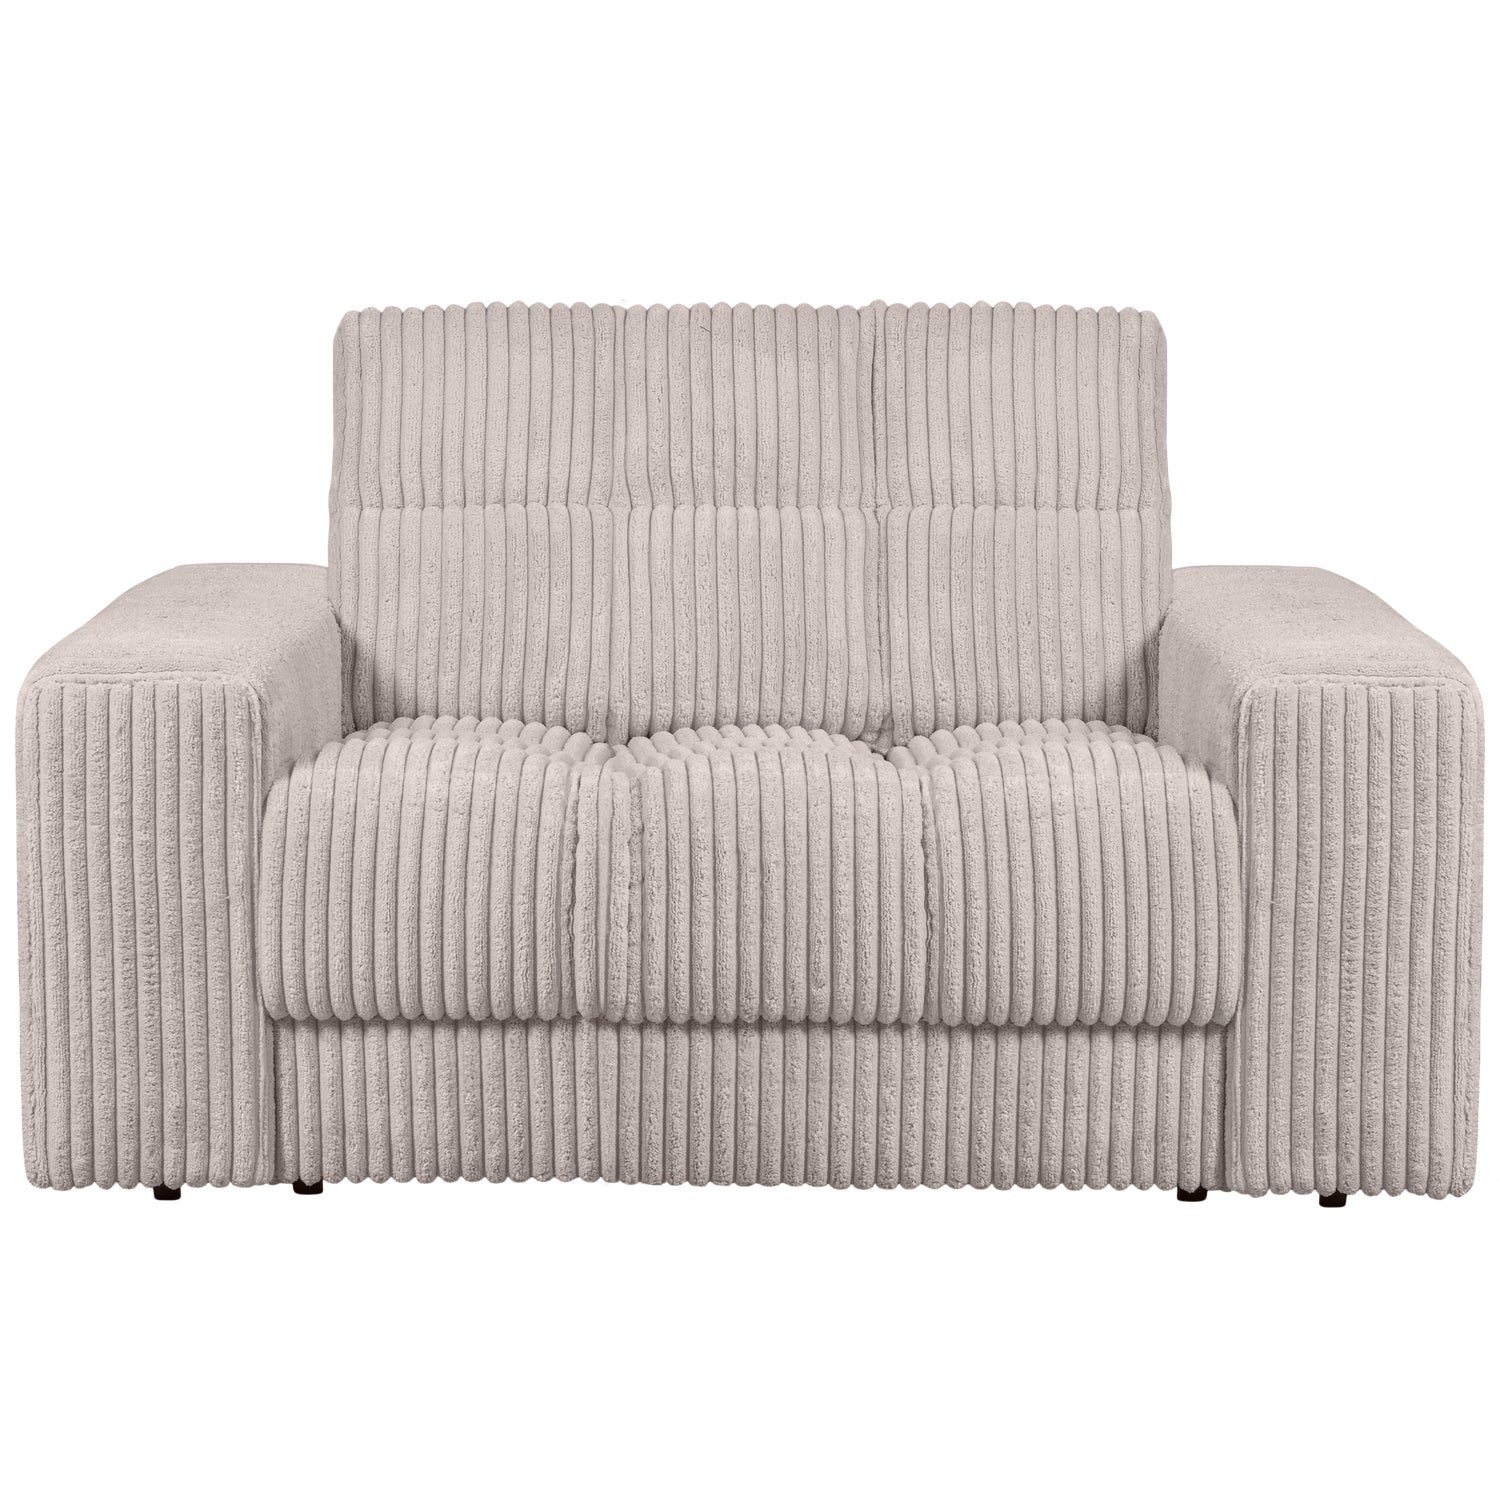 379006-RN-01_VS_WE_Second_date_loveseat_grove_ribstof_naturel.png?auto=webp&format=png&width=1500&height=1500